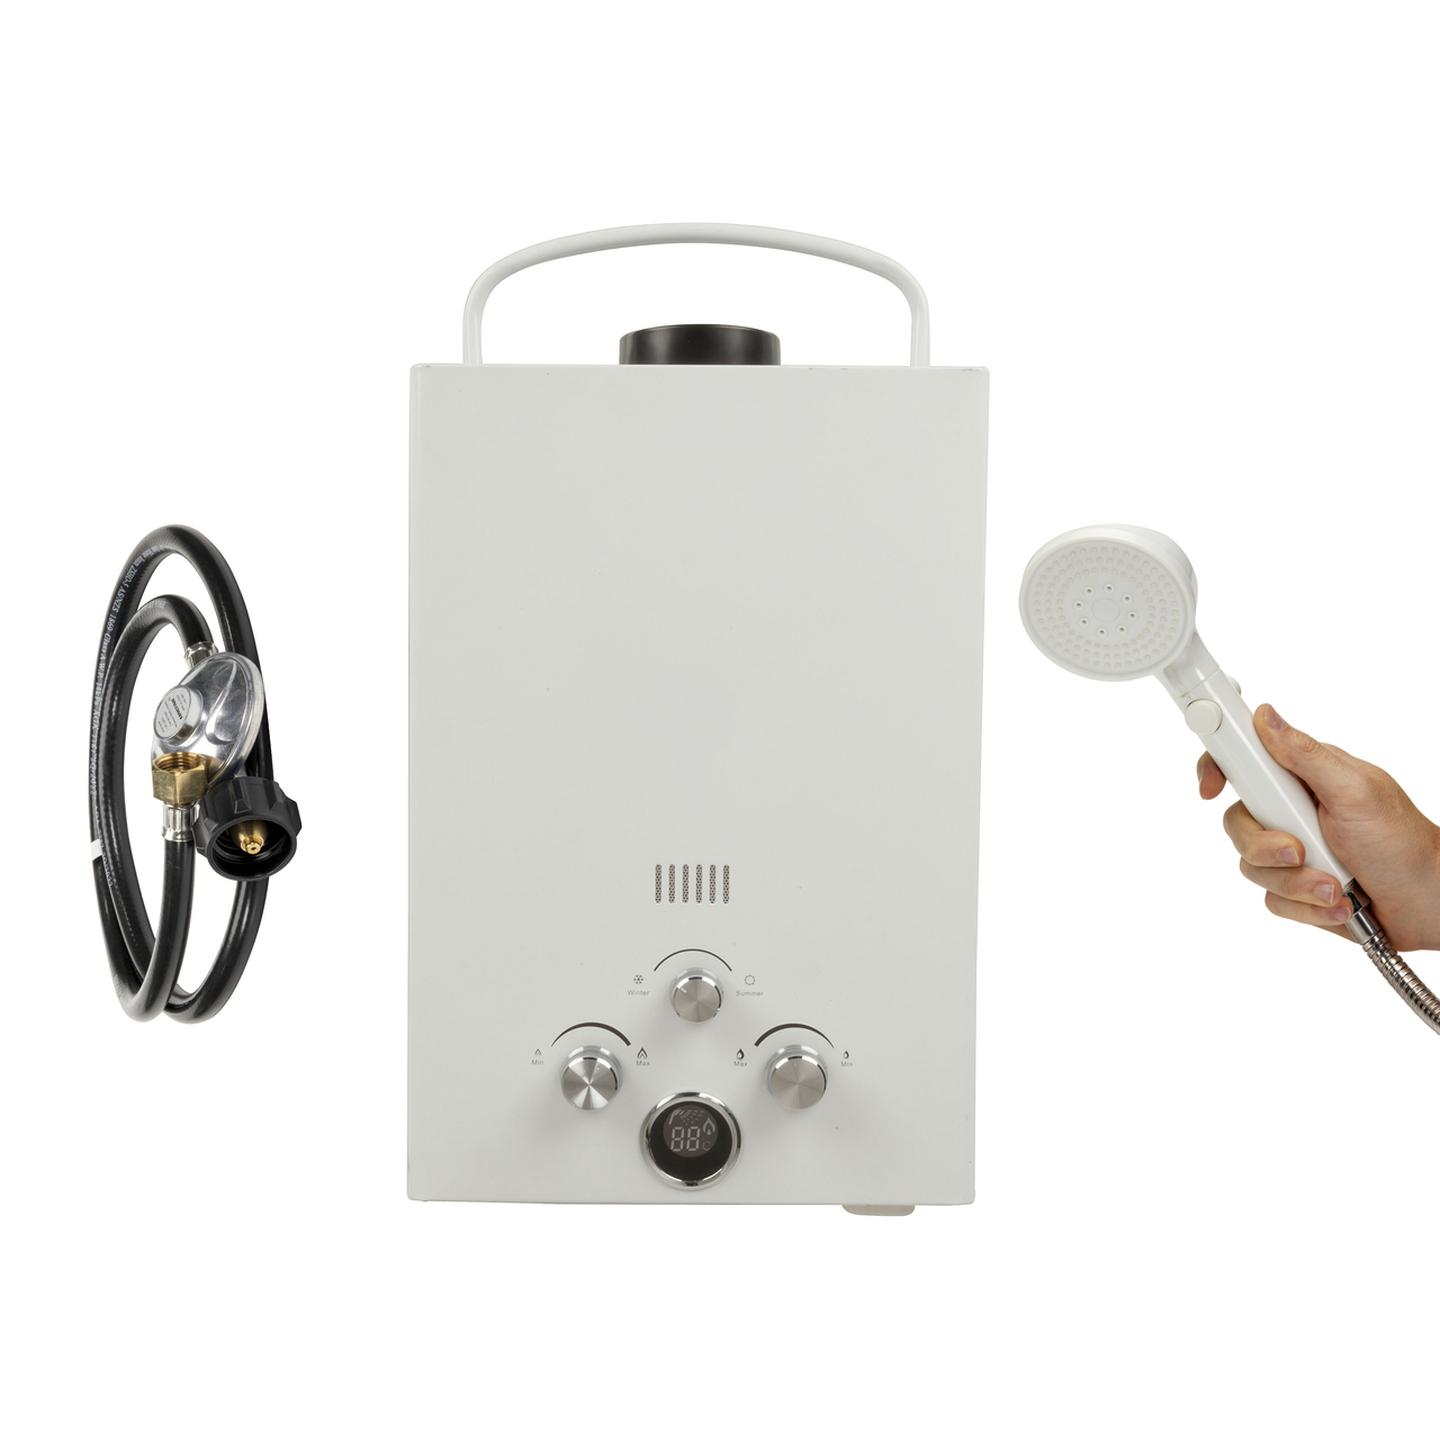 Athanor Portable Gas Water Heater